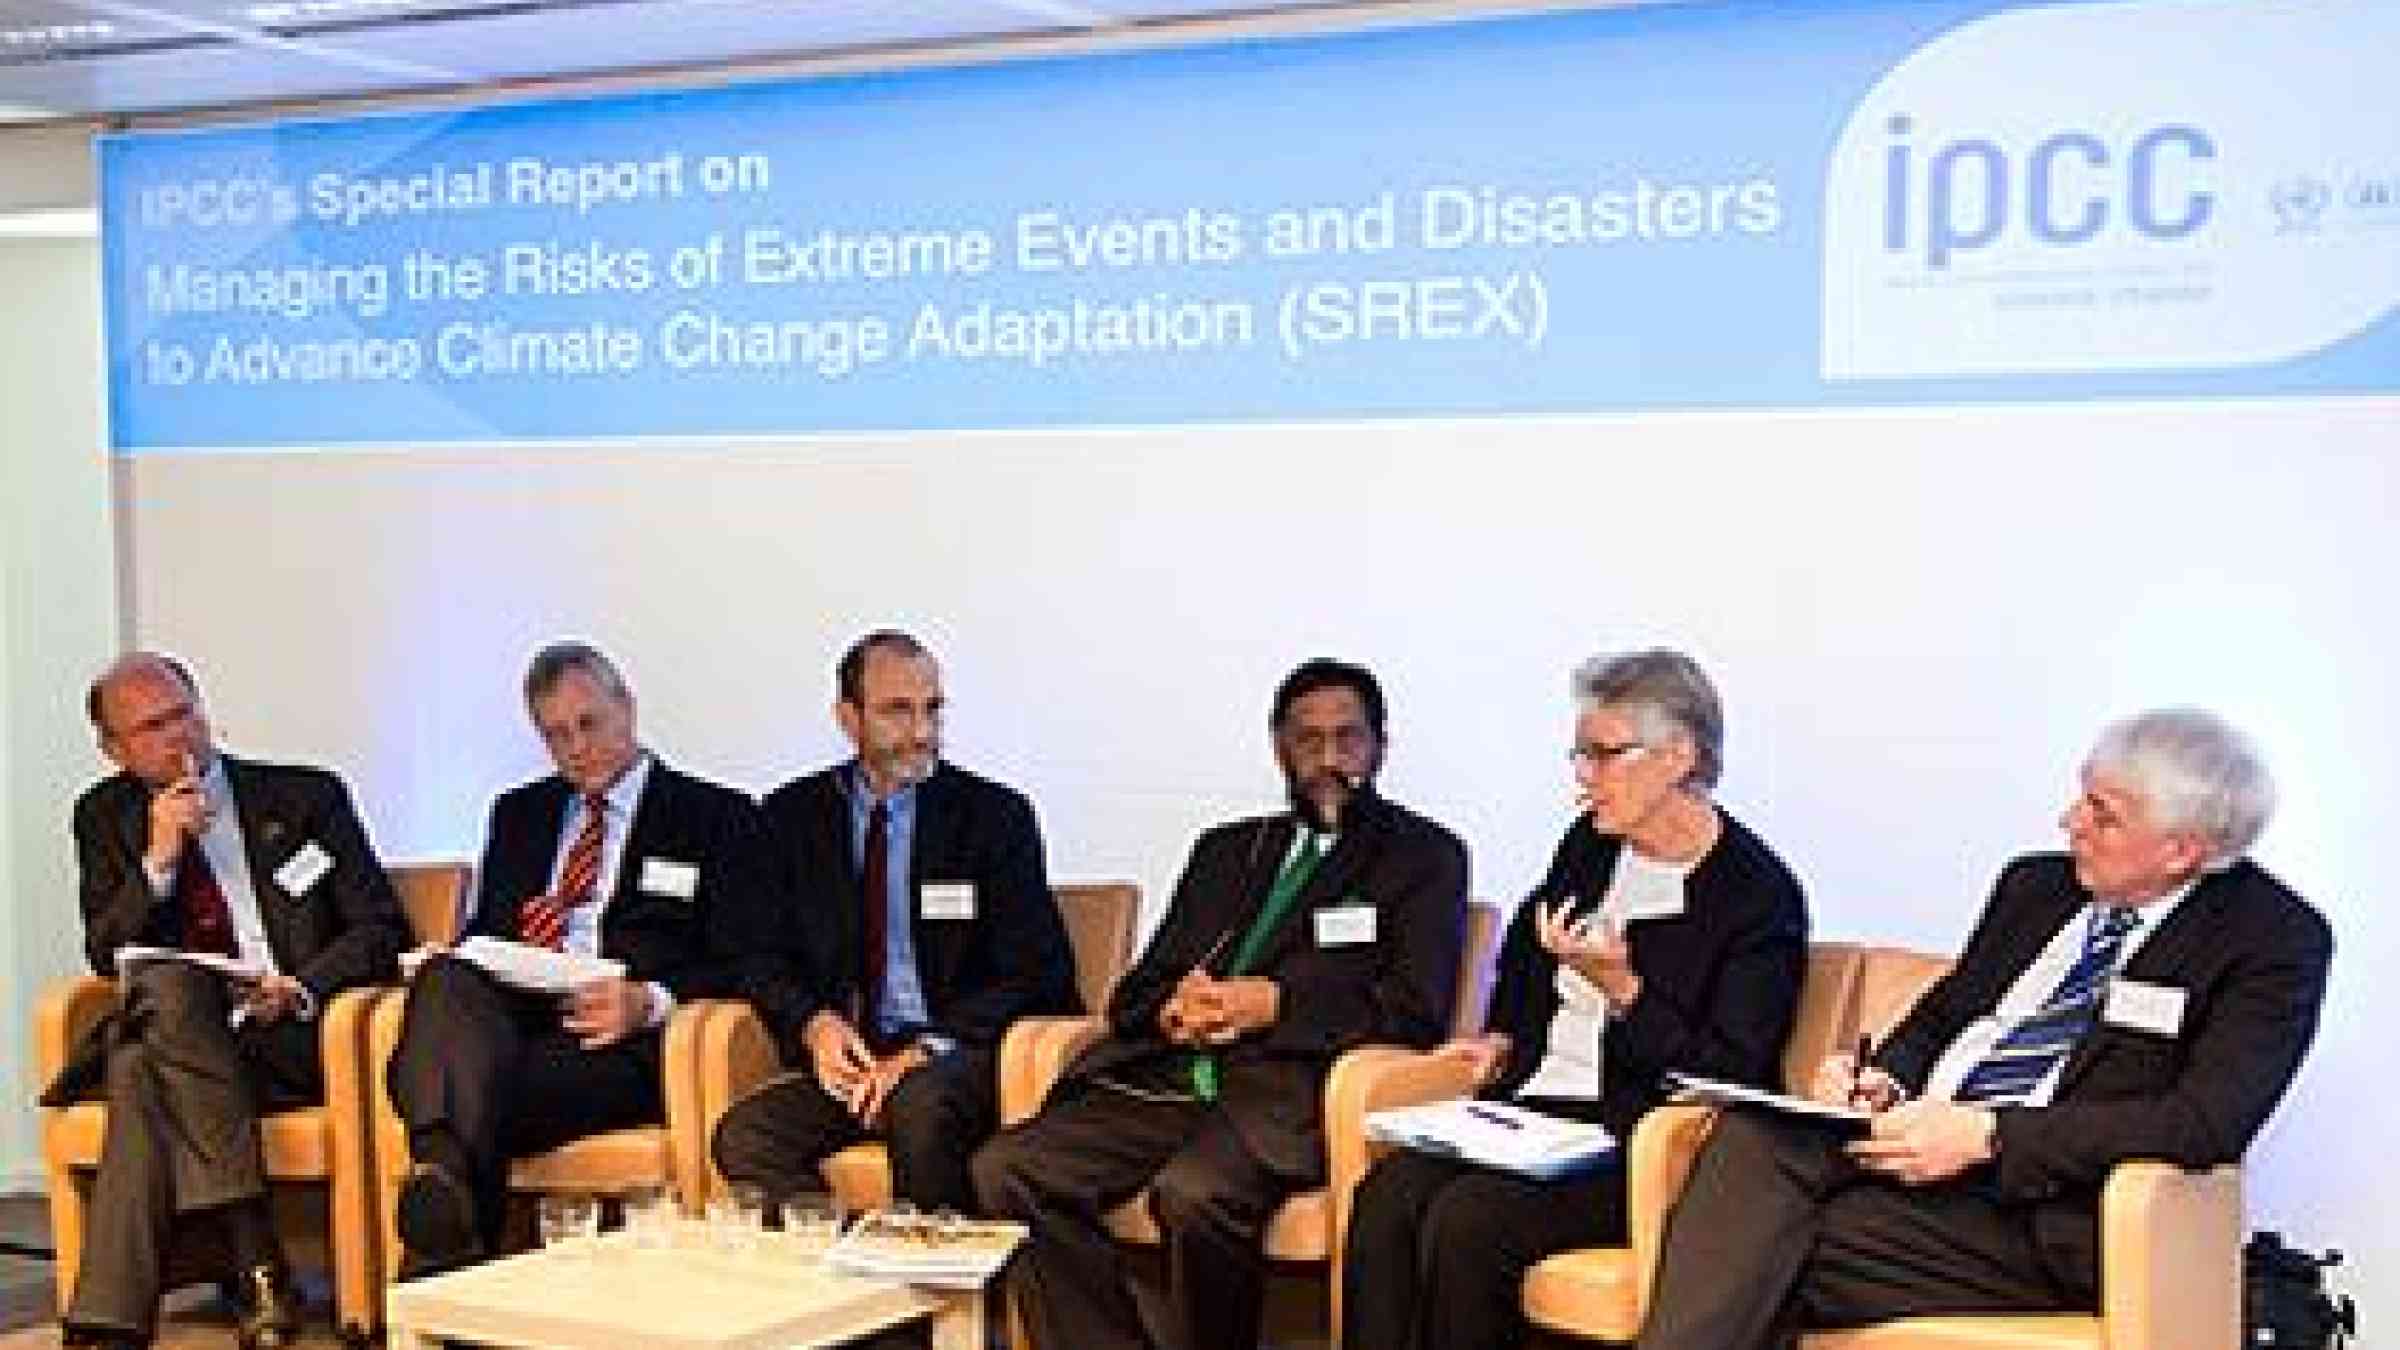 From left to right: Jean-Pascal van Ypersele (IPCC Vice Chair and Professor of Climate and Environmental Sciences at UCL Belgium),  John Coomber (Board member of Swiss Re and Chairman of ClimateWise) Chris Field, Co-chair of IPCC Working Group II, Rajendra Pachauri, Chair of the IPCC, Margareta Wahlström, Special Representative of the Secretary-General for Disaster Risk Reduction, and Jamie Shea, NATO Deputy Assistant Secretary General for Emerging Security Challenges. © Belspo / Nevens.